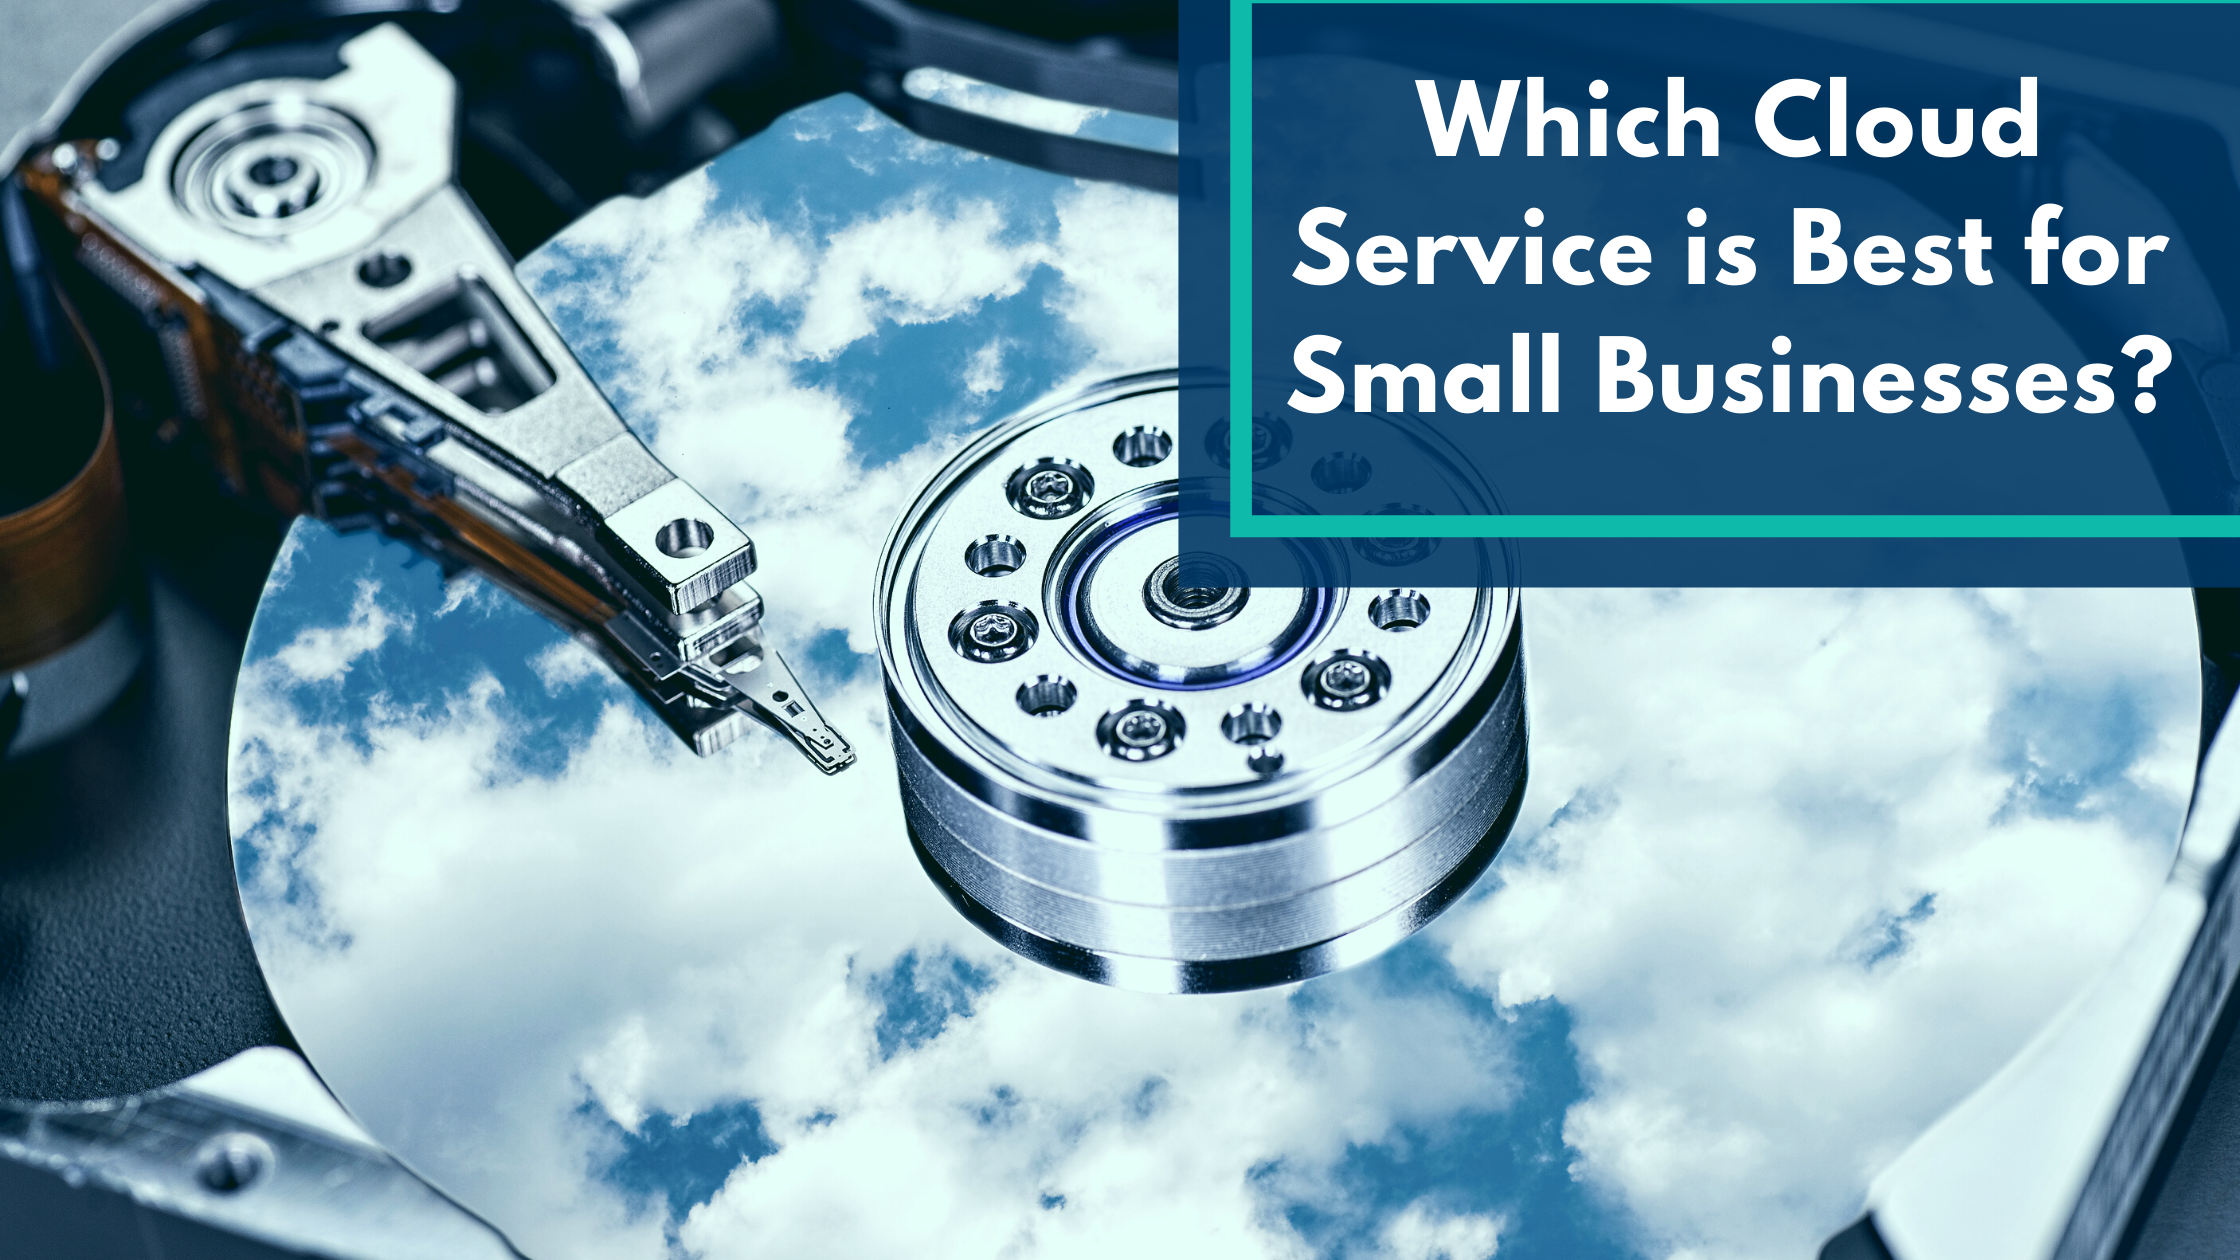 Which Cloud Service is Best for Small Businesses?